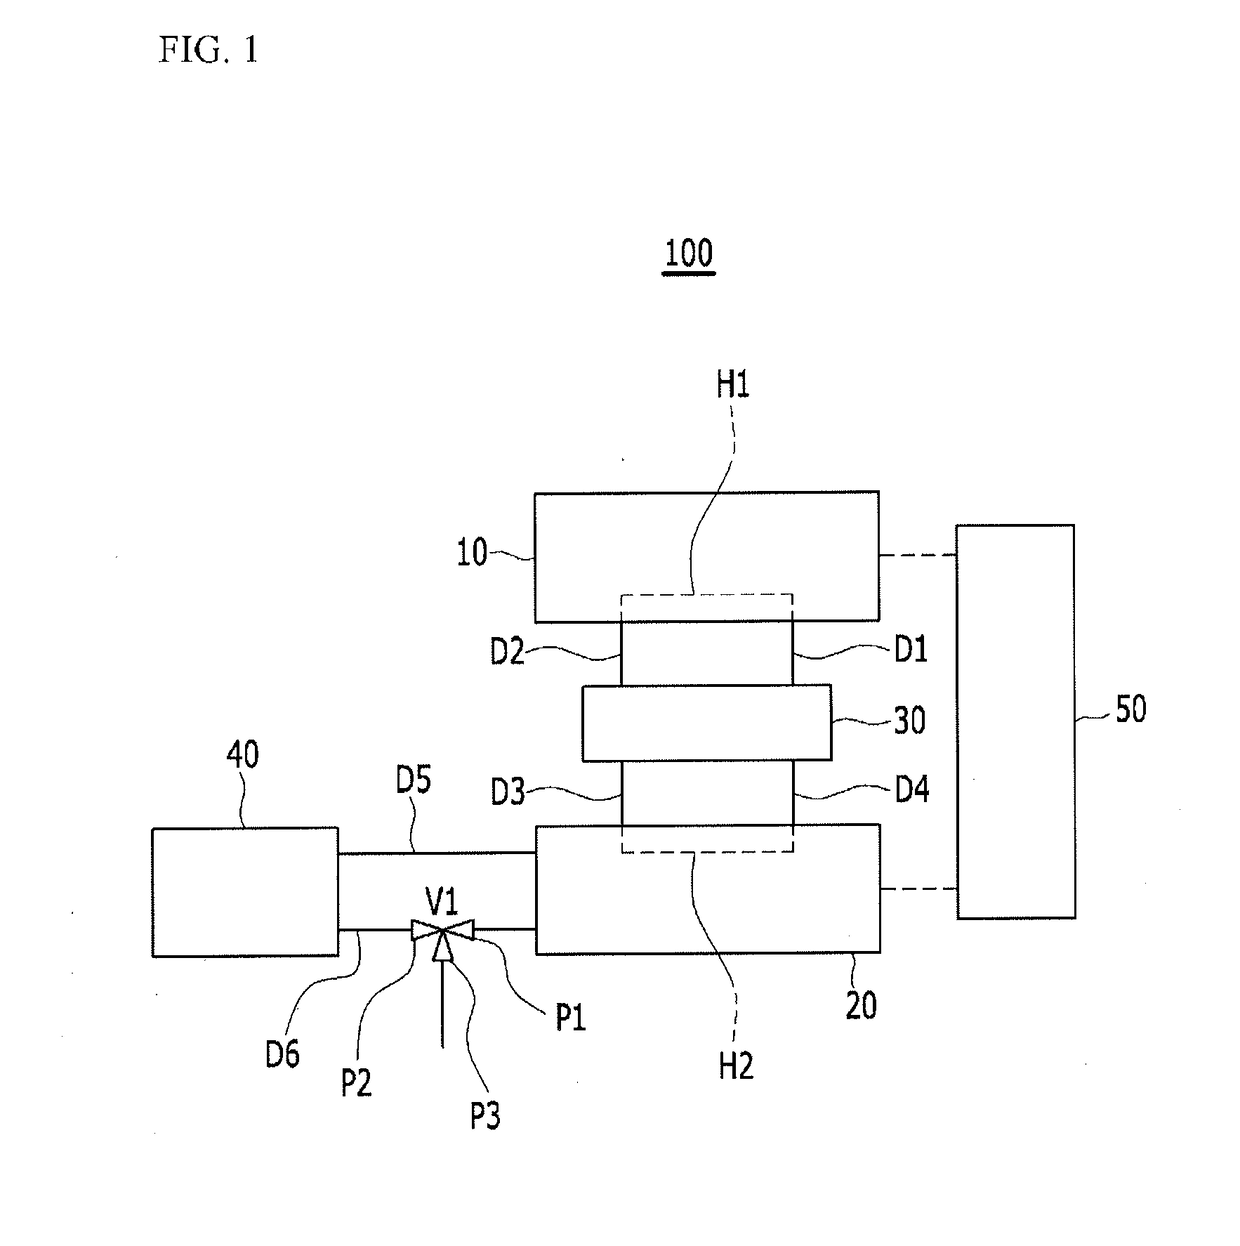 Thermal management system for fuel cell vehicle